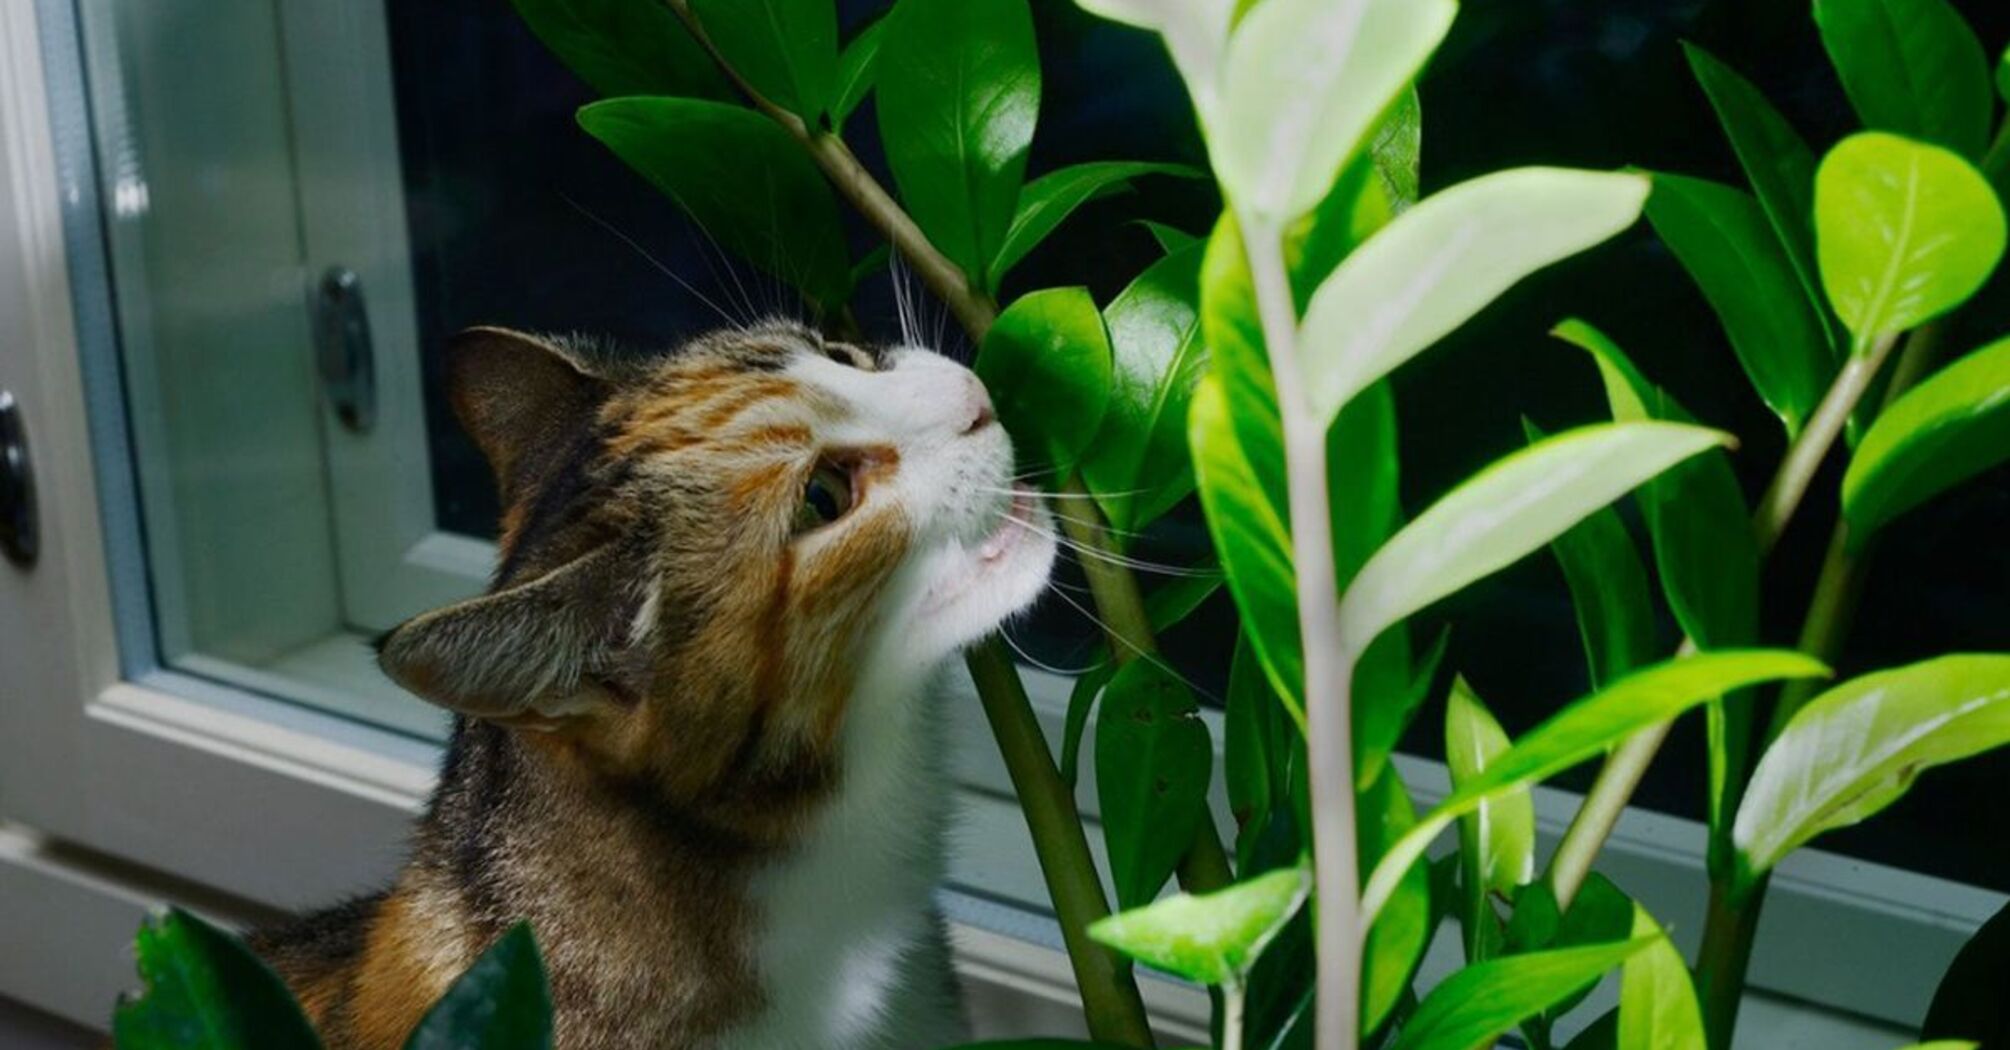 How to protect indoor plants from cats